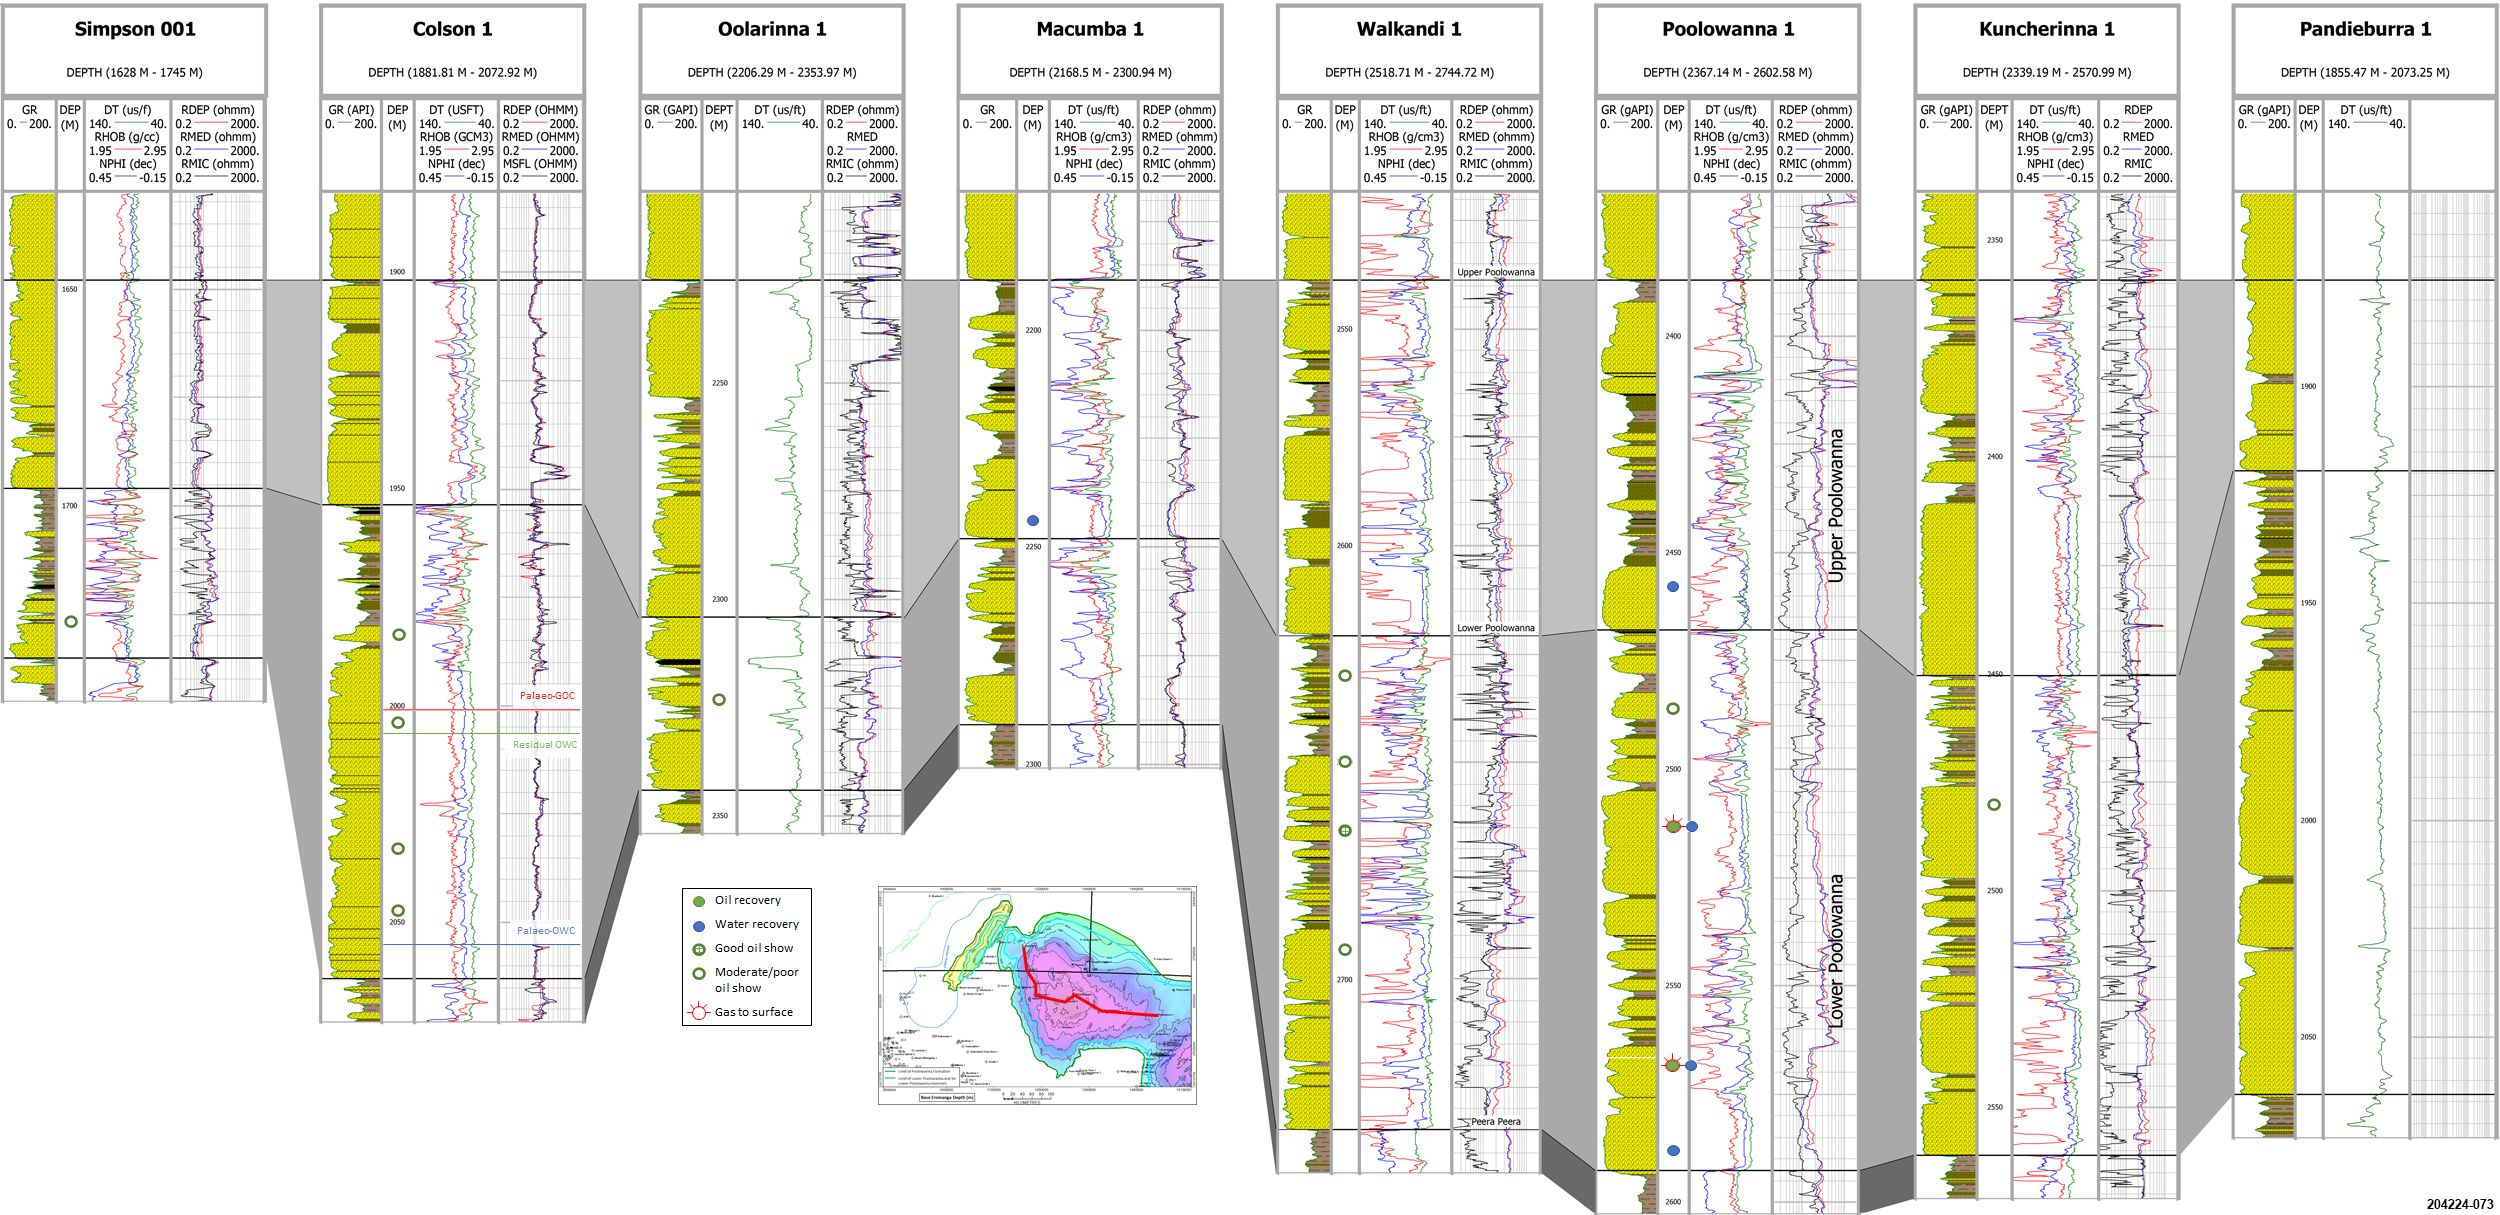 Poolowanna Formation correlation in the Poolowanna Trough. Datum: Top Poolowanna Formation.